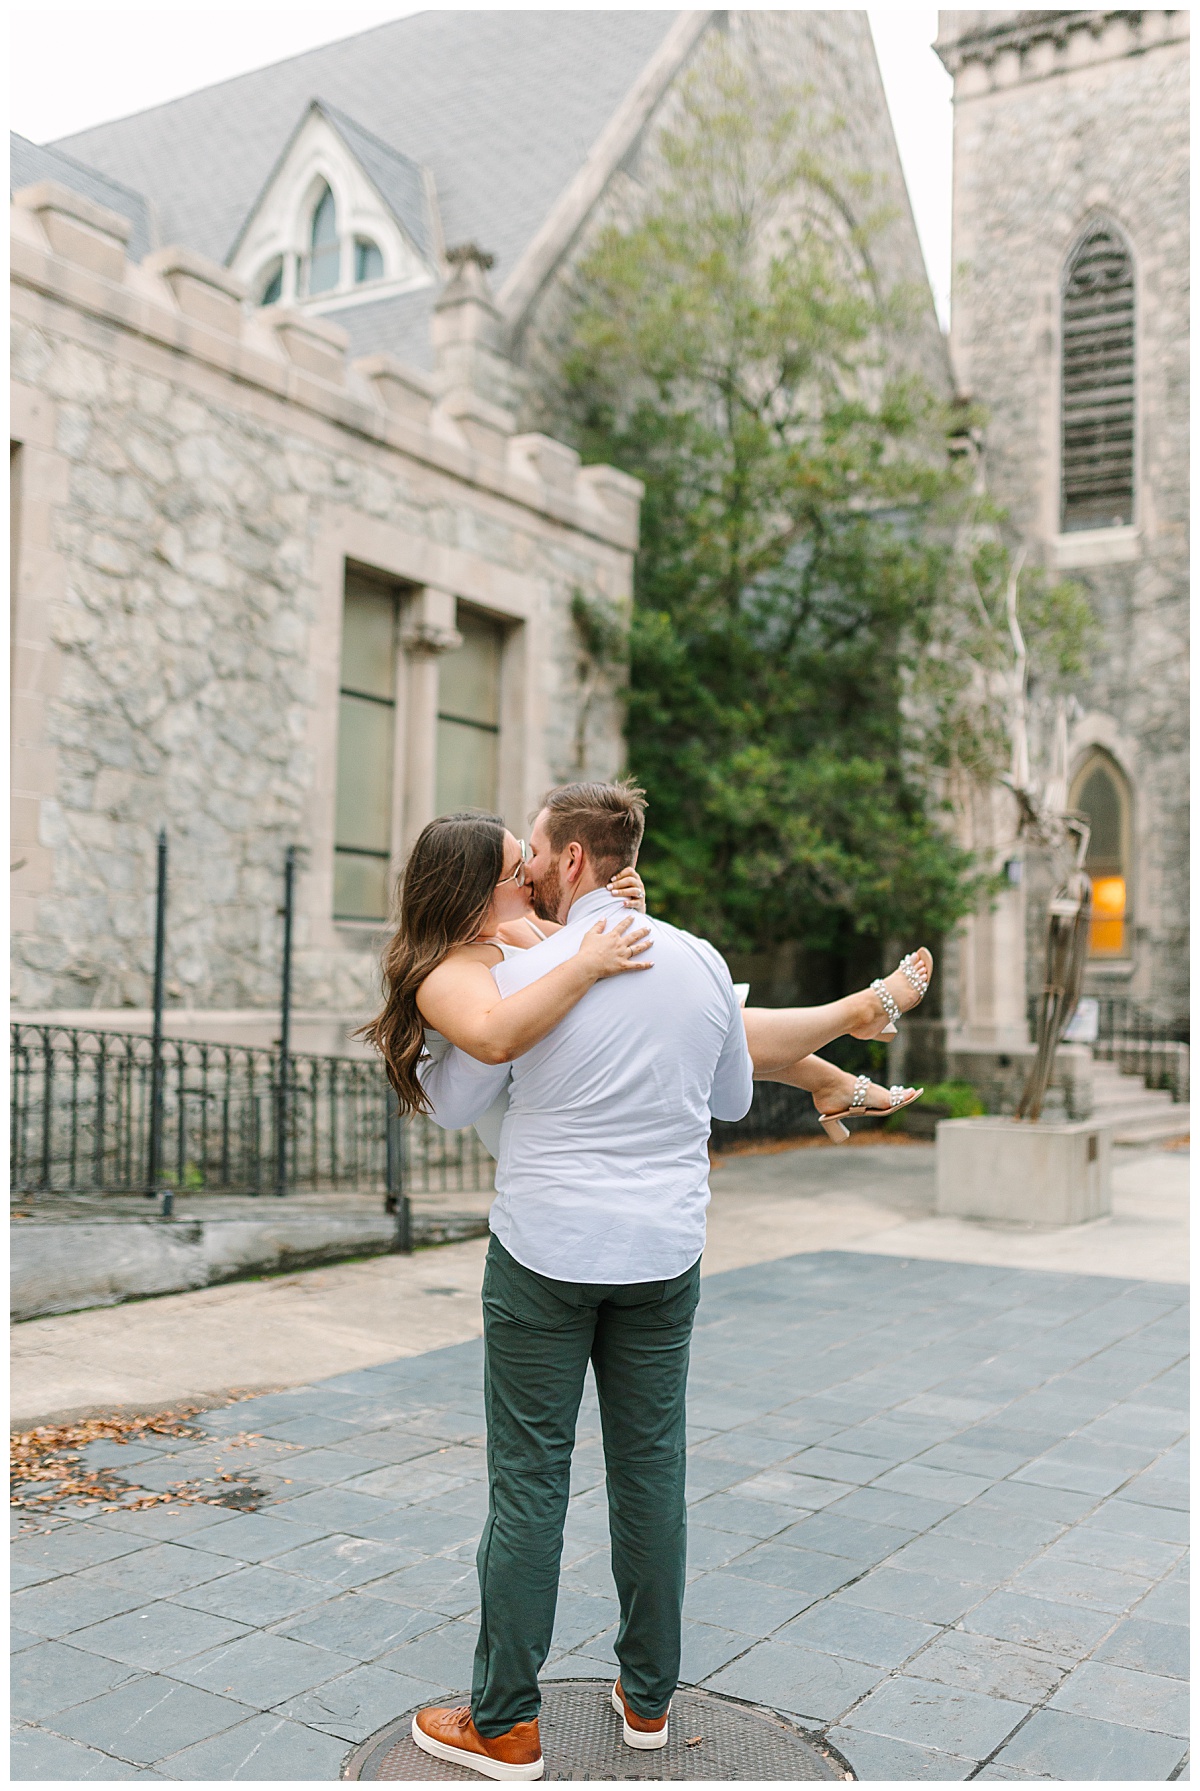 A Florida man wearing jeans and a button up shirt cradles his brunette fiance in his arms for a kiss in front of a stone building in Jacksonville.